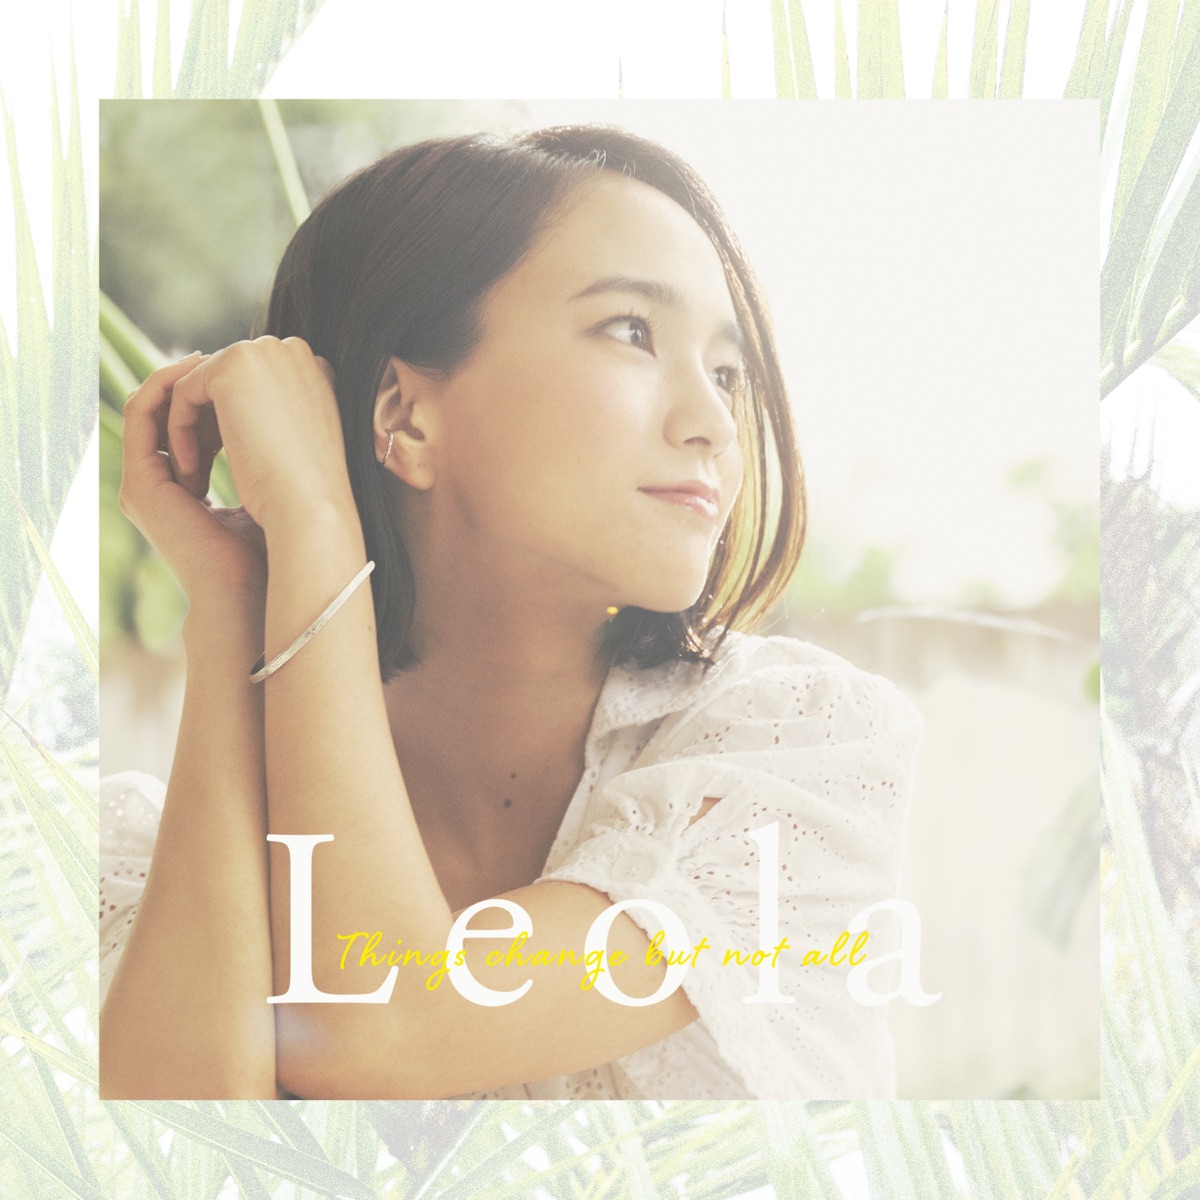 『Leola - After the Rain feat. FUKI』収録の『Things change but not all』ジャケット